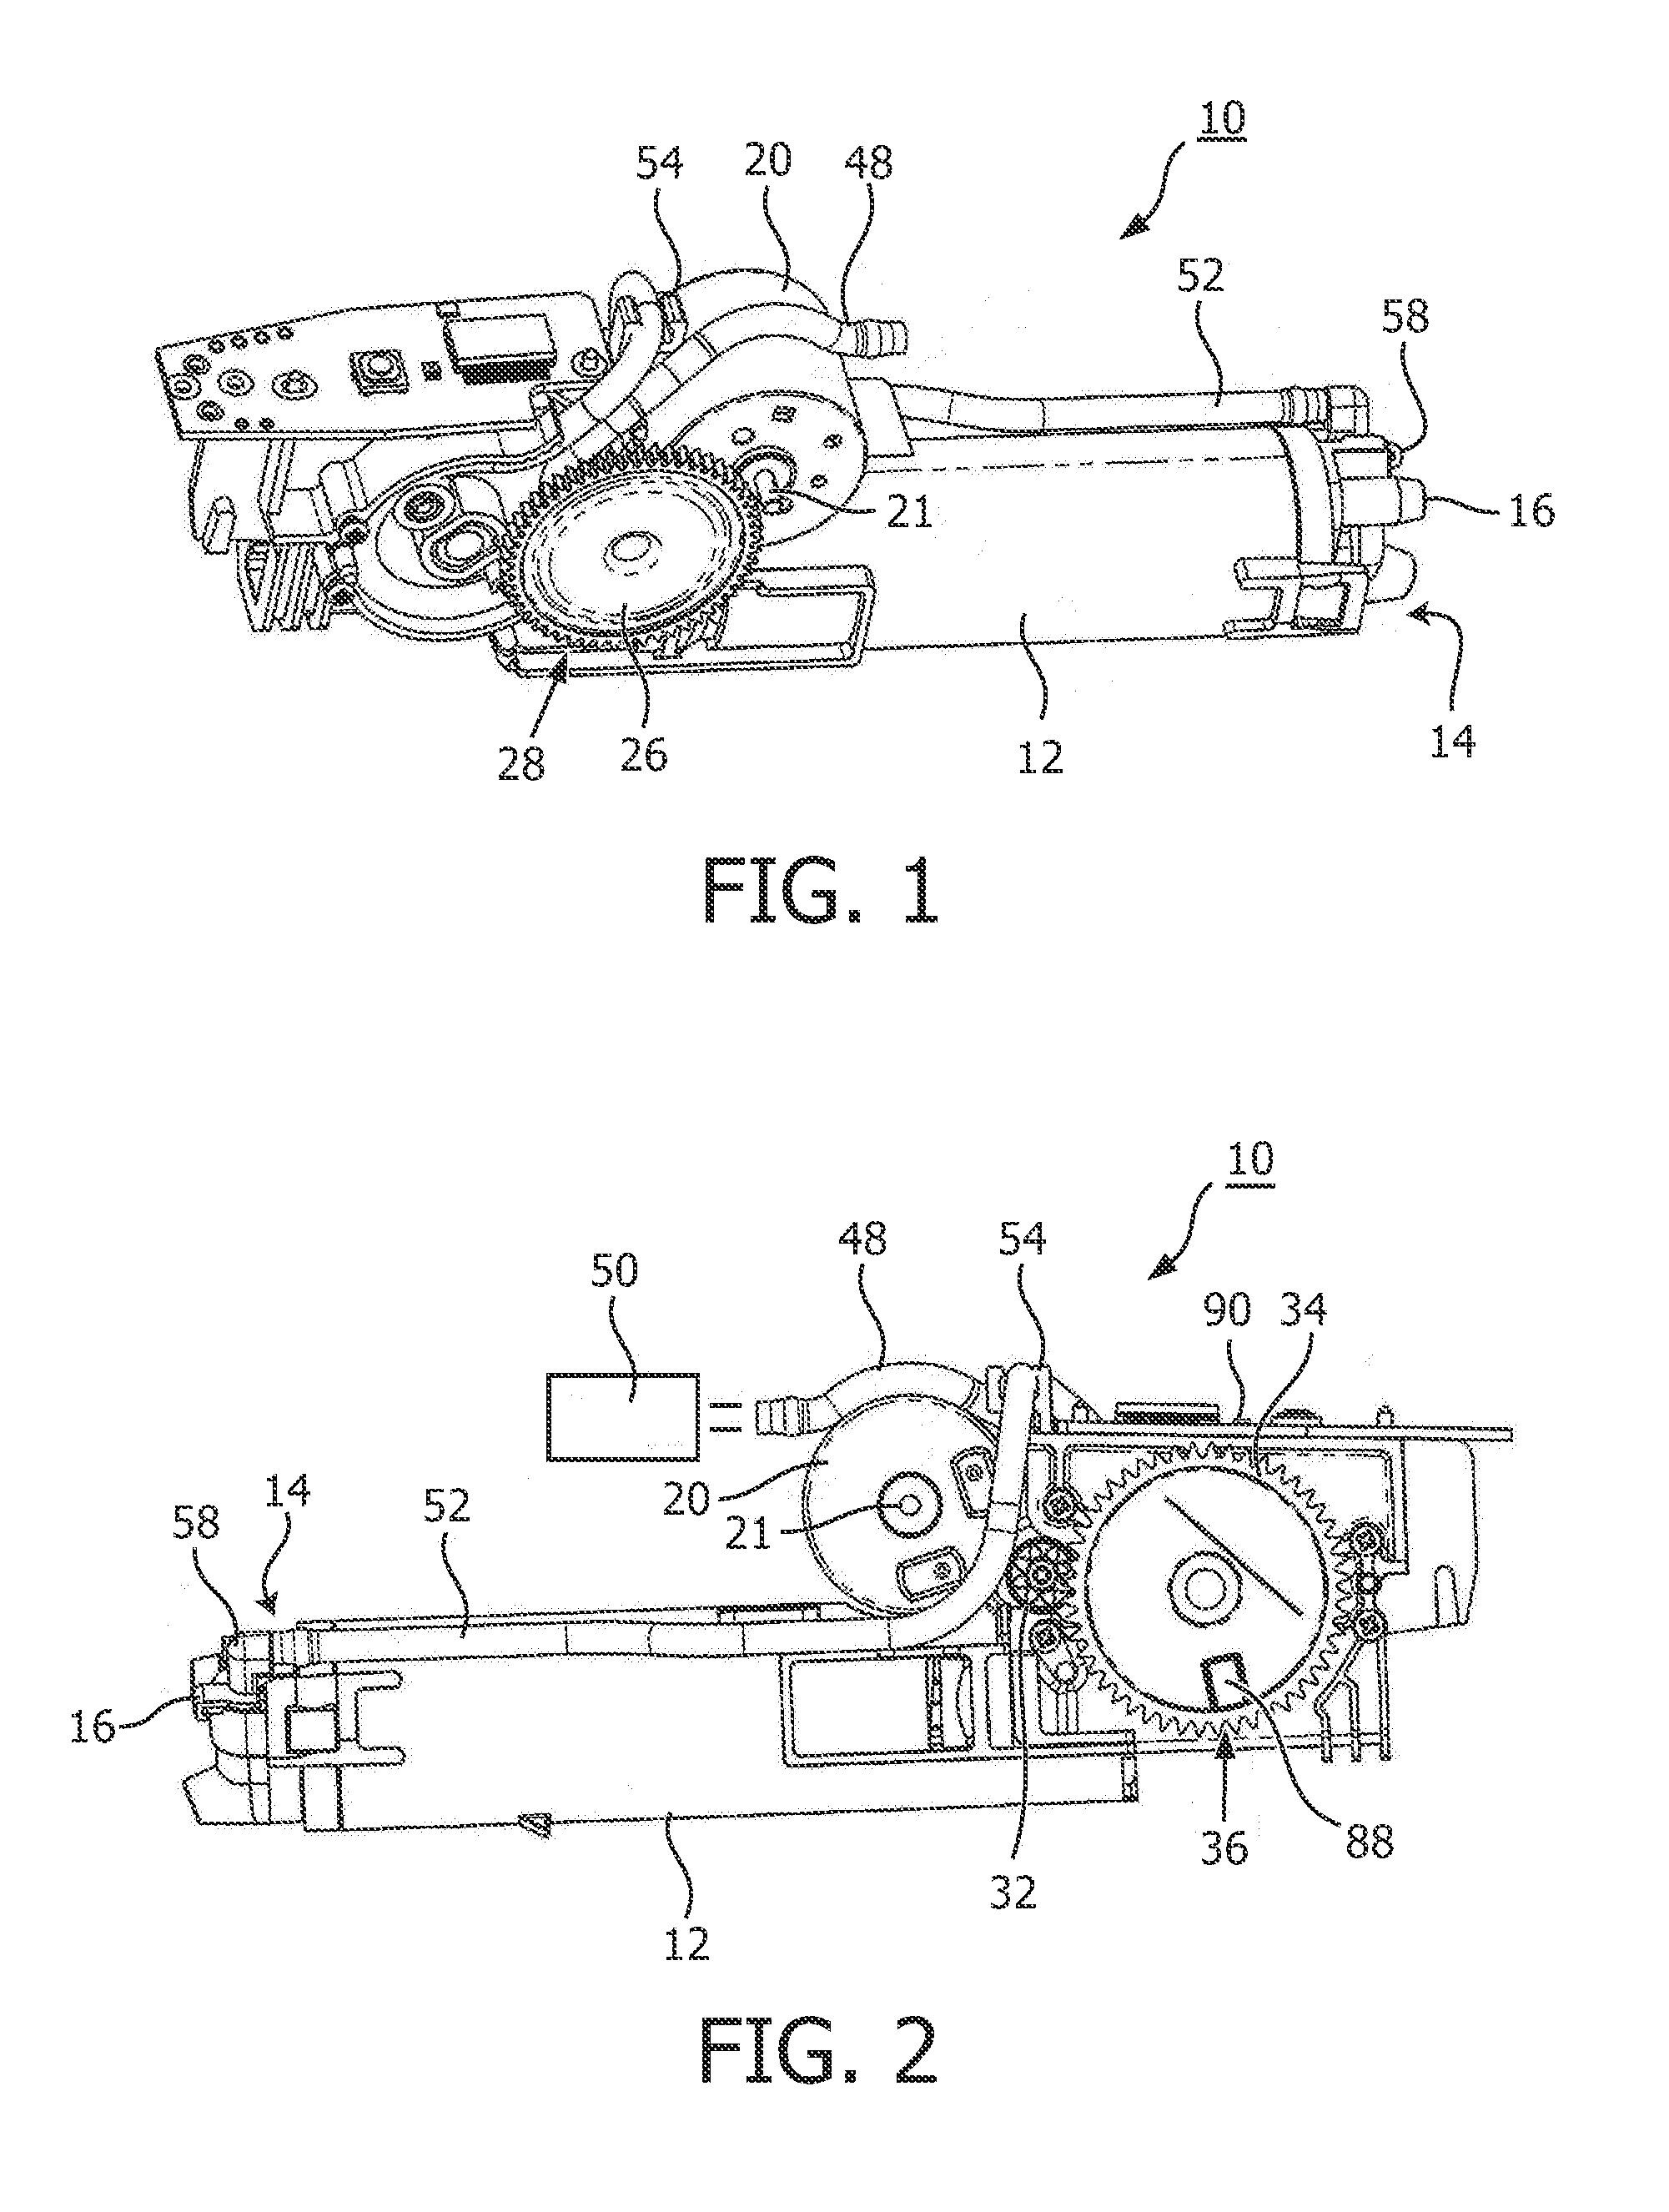 Oral care appliance using pulsed fluid flow